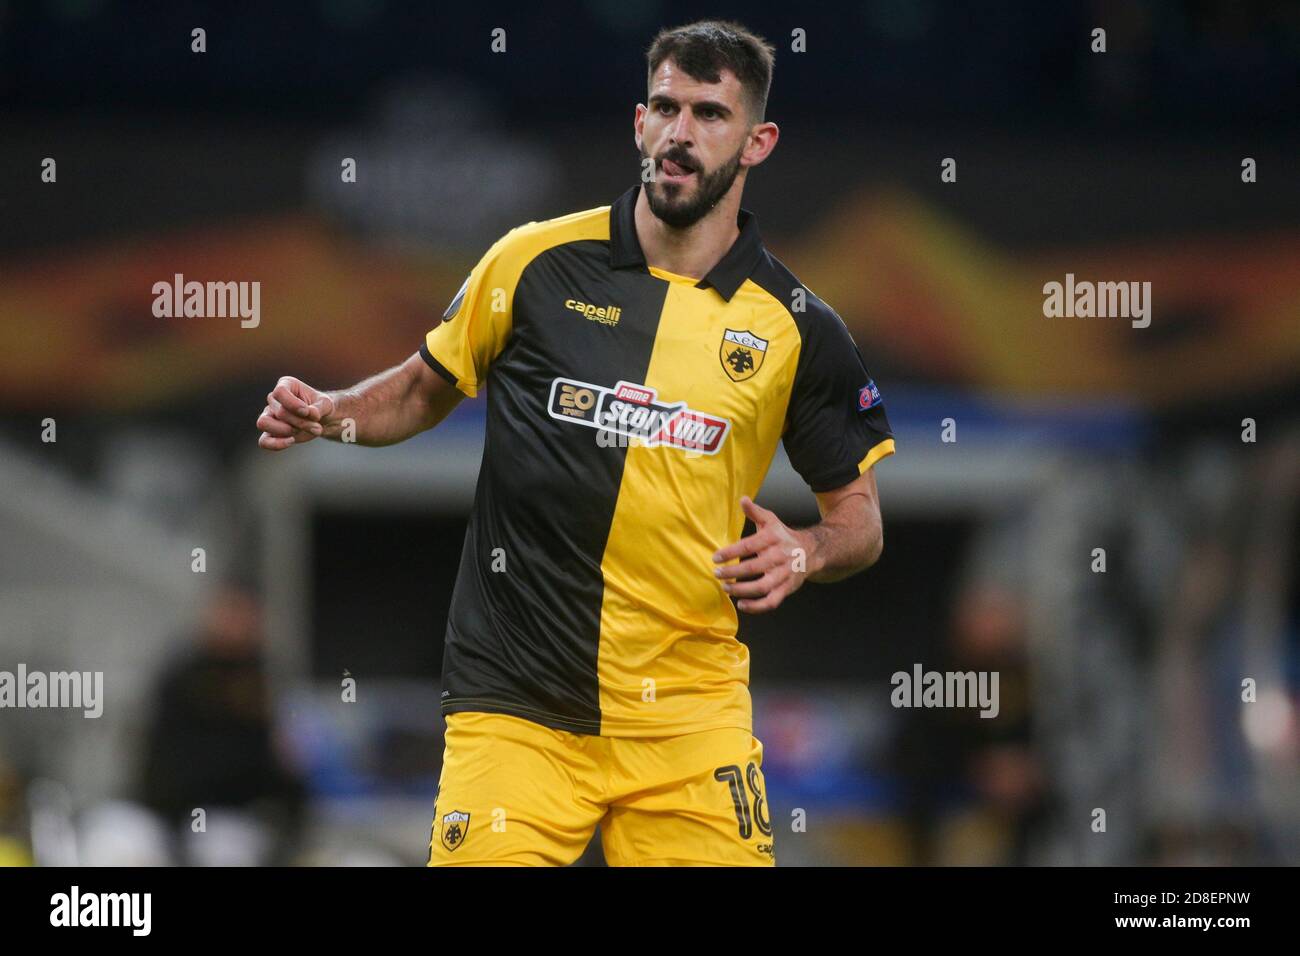 ATHENS, GREECE - OCTOBER 29: Nélson Oliveira of AEK Athens during the UEFA  Europa League Group G stage match between AEK Athens and Leicester City at  Athens Olympic Stadium on October 29,